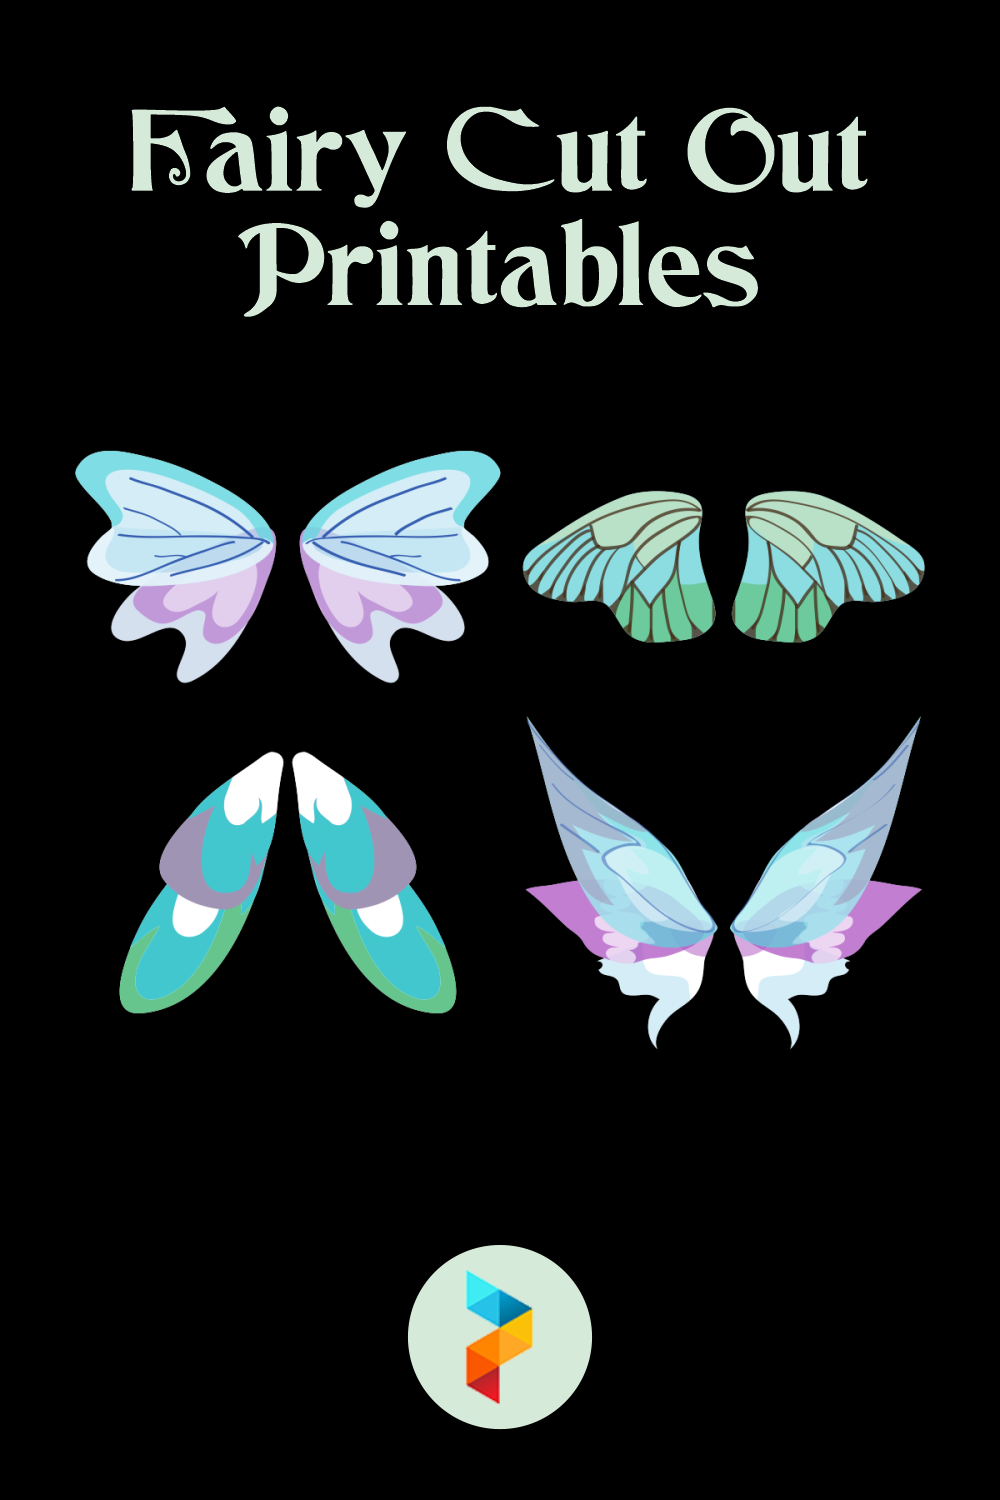 Fairy Cut Out Printables